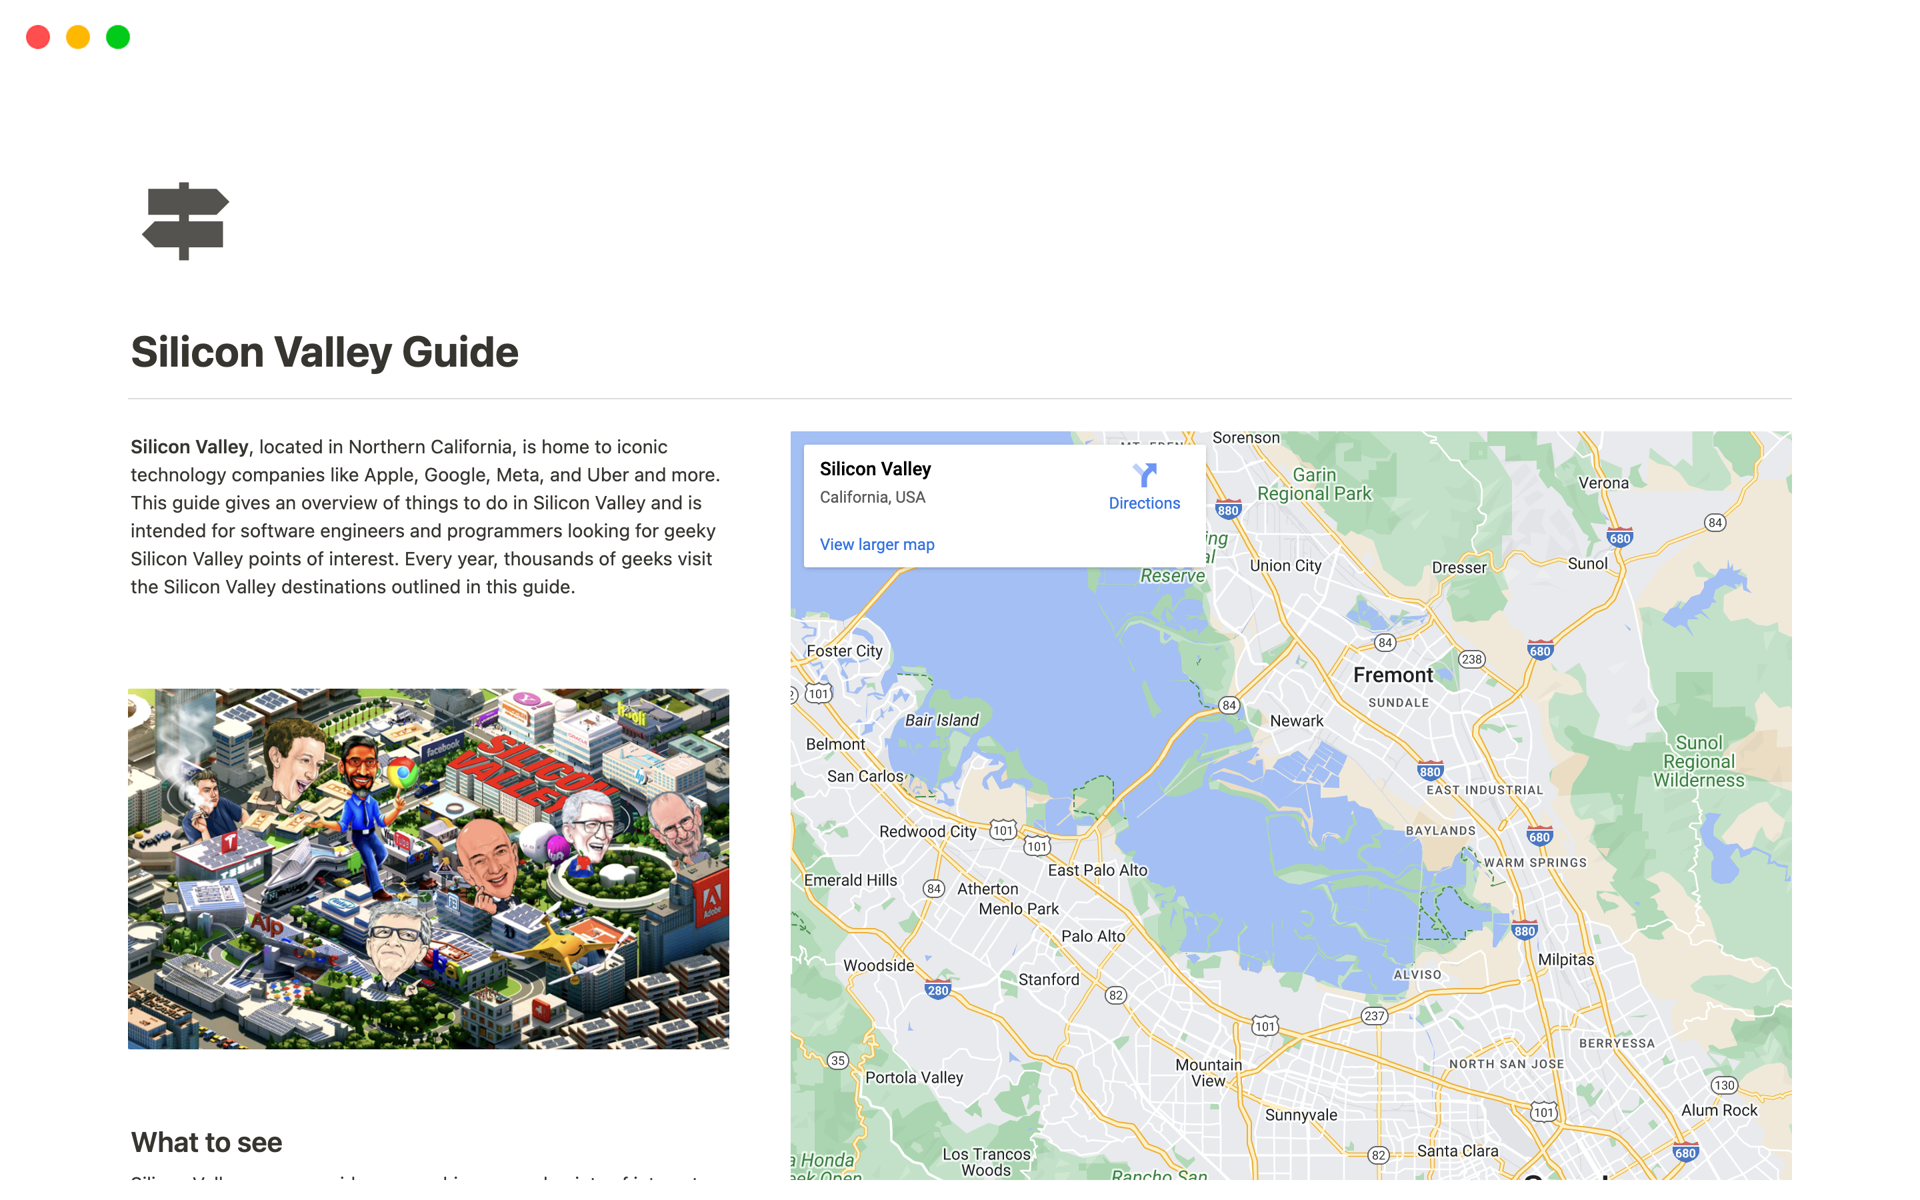 A comprehensive template that provides a curated list of nerdy places to visit in Silicon Valley, showcasing the region's tech culture and innovation.